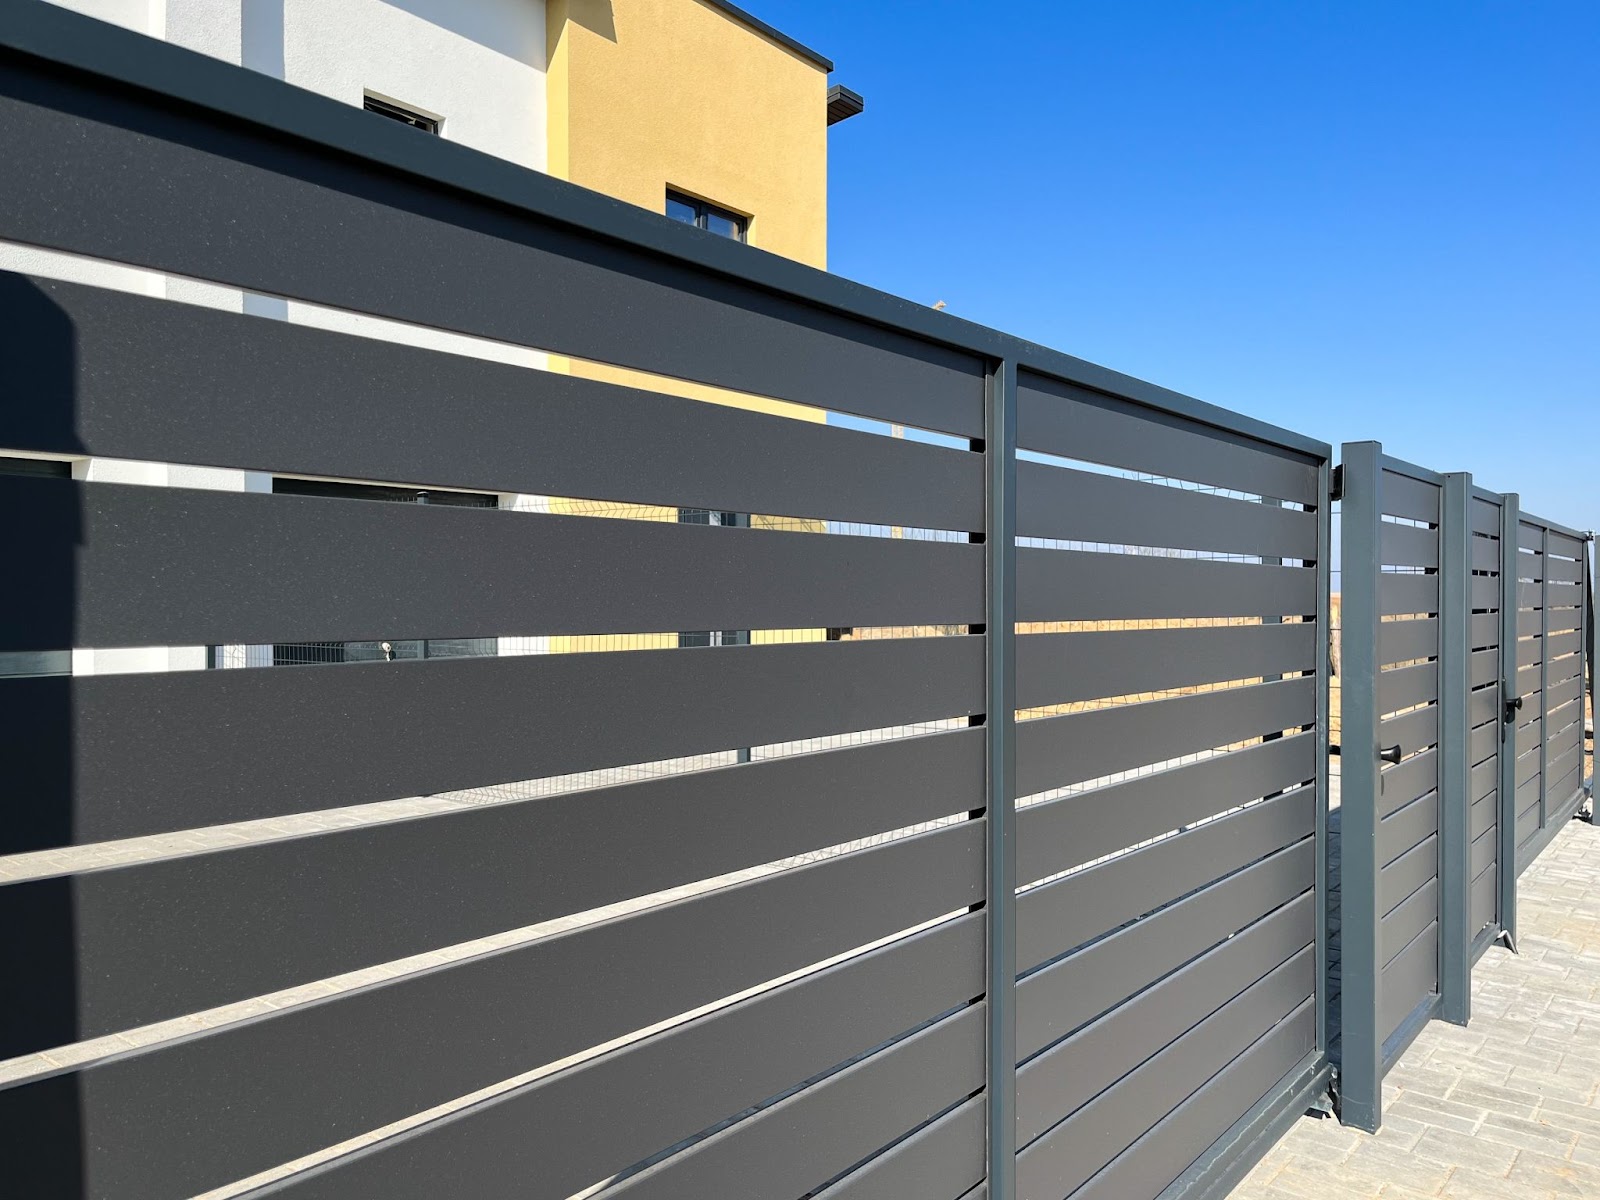 Cost-Effective Security: How GRP Fencing Can Save You Money Long-Term